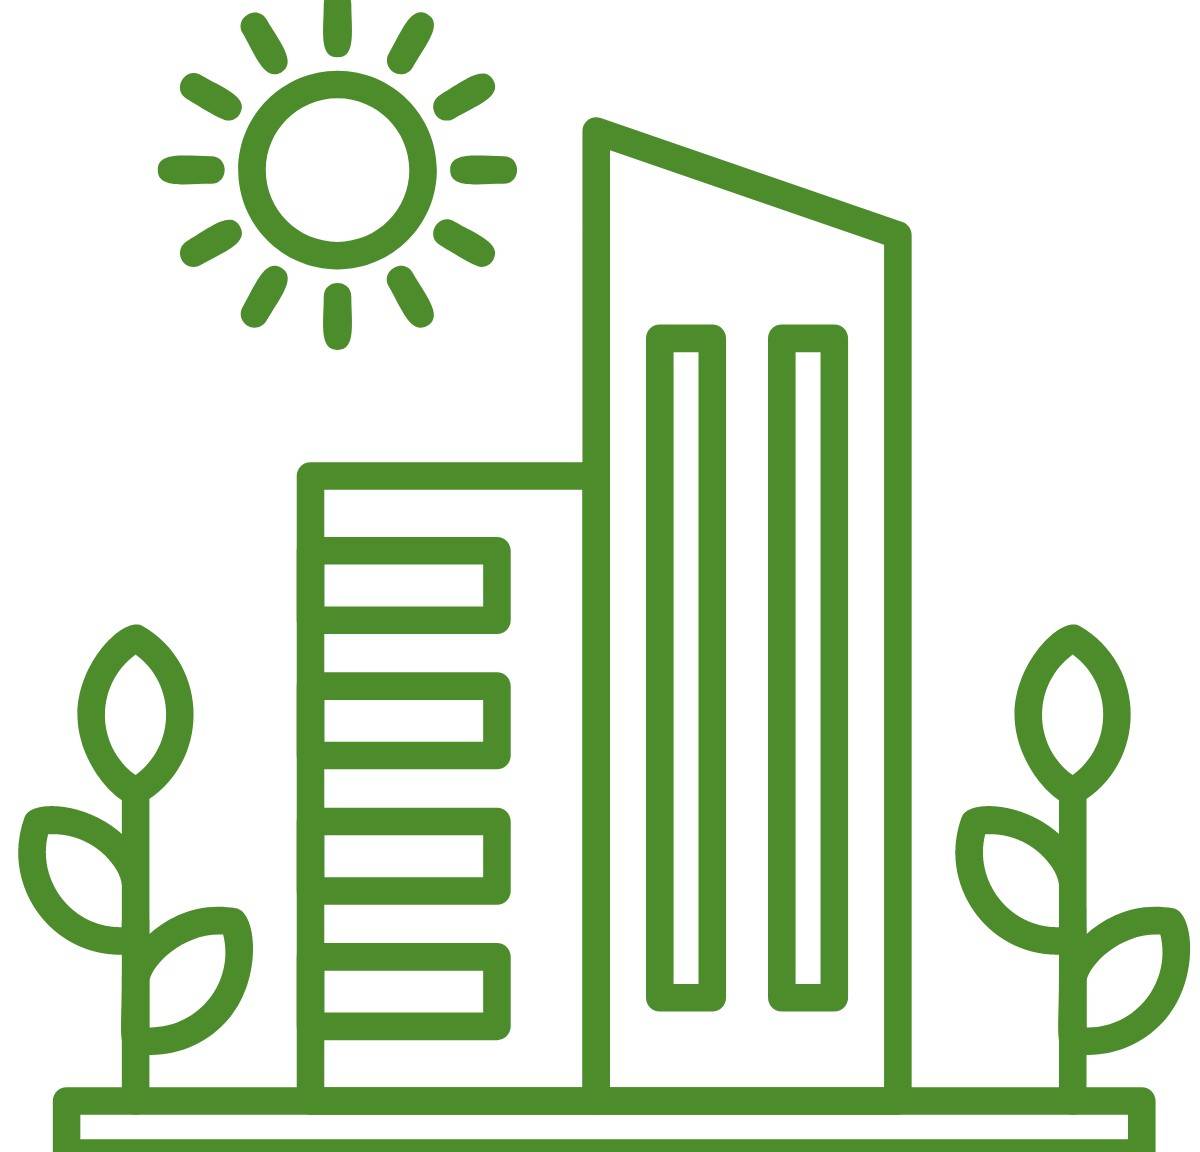 Green graphic icon of a building surrounded by plants and sun.